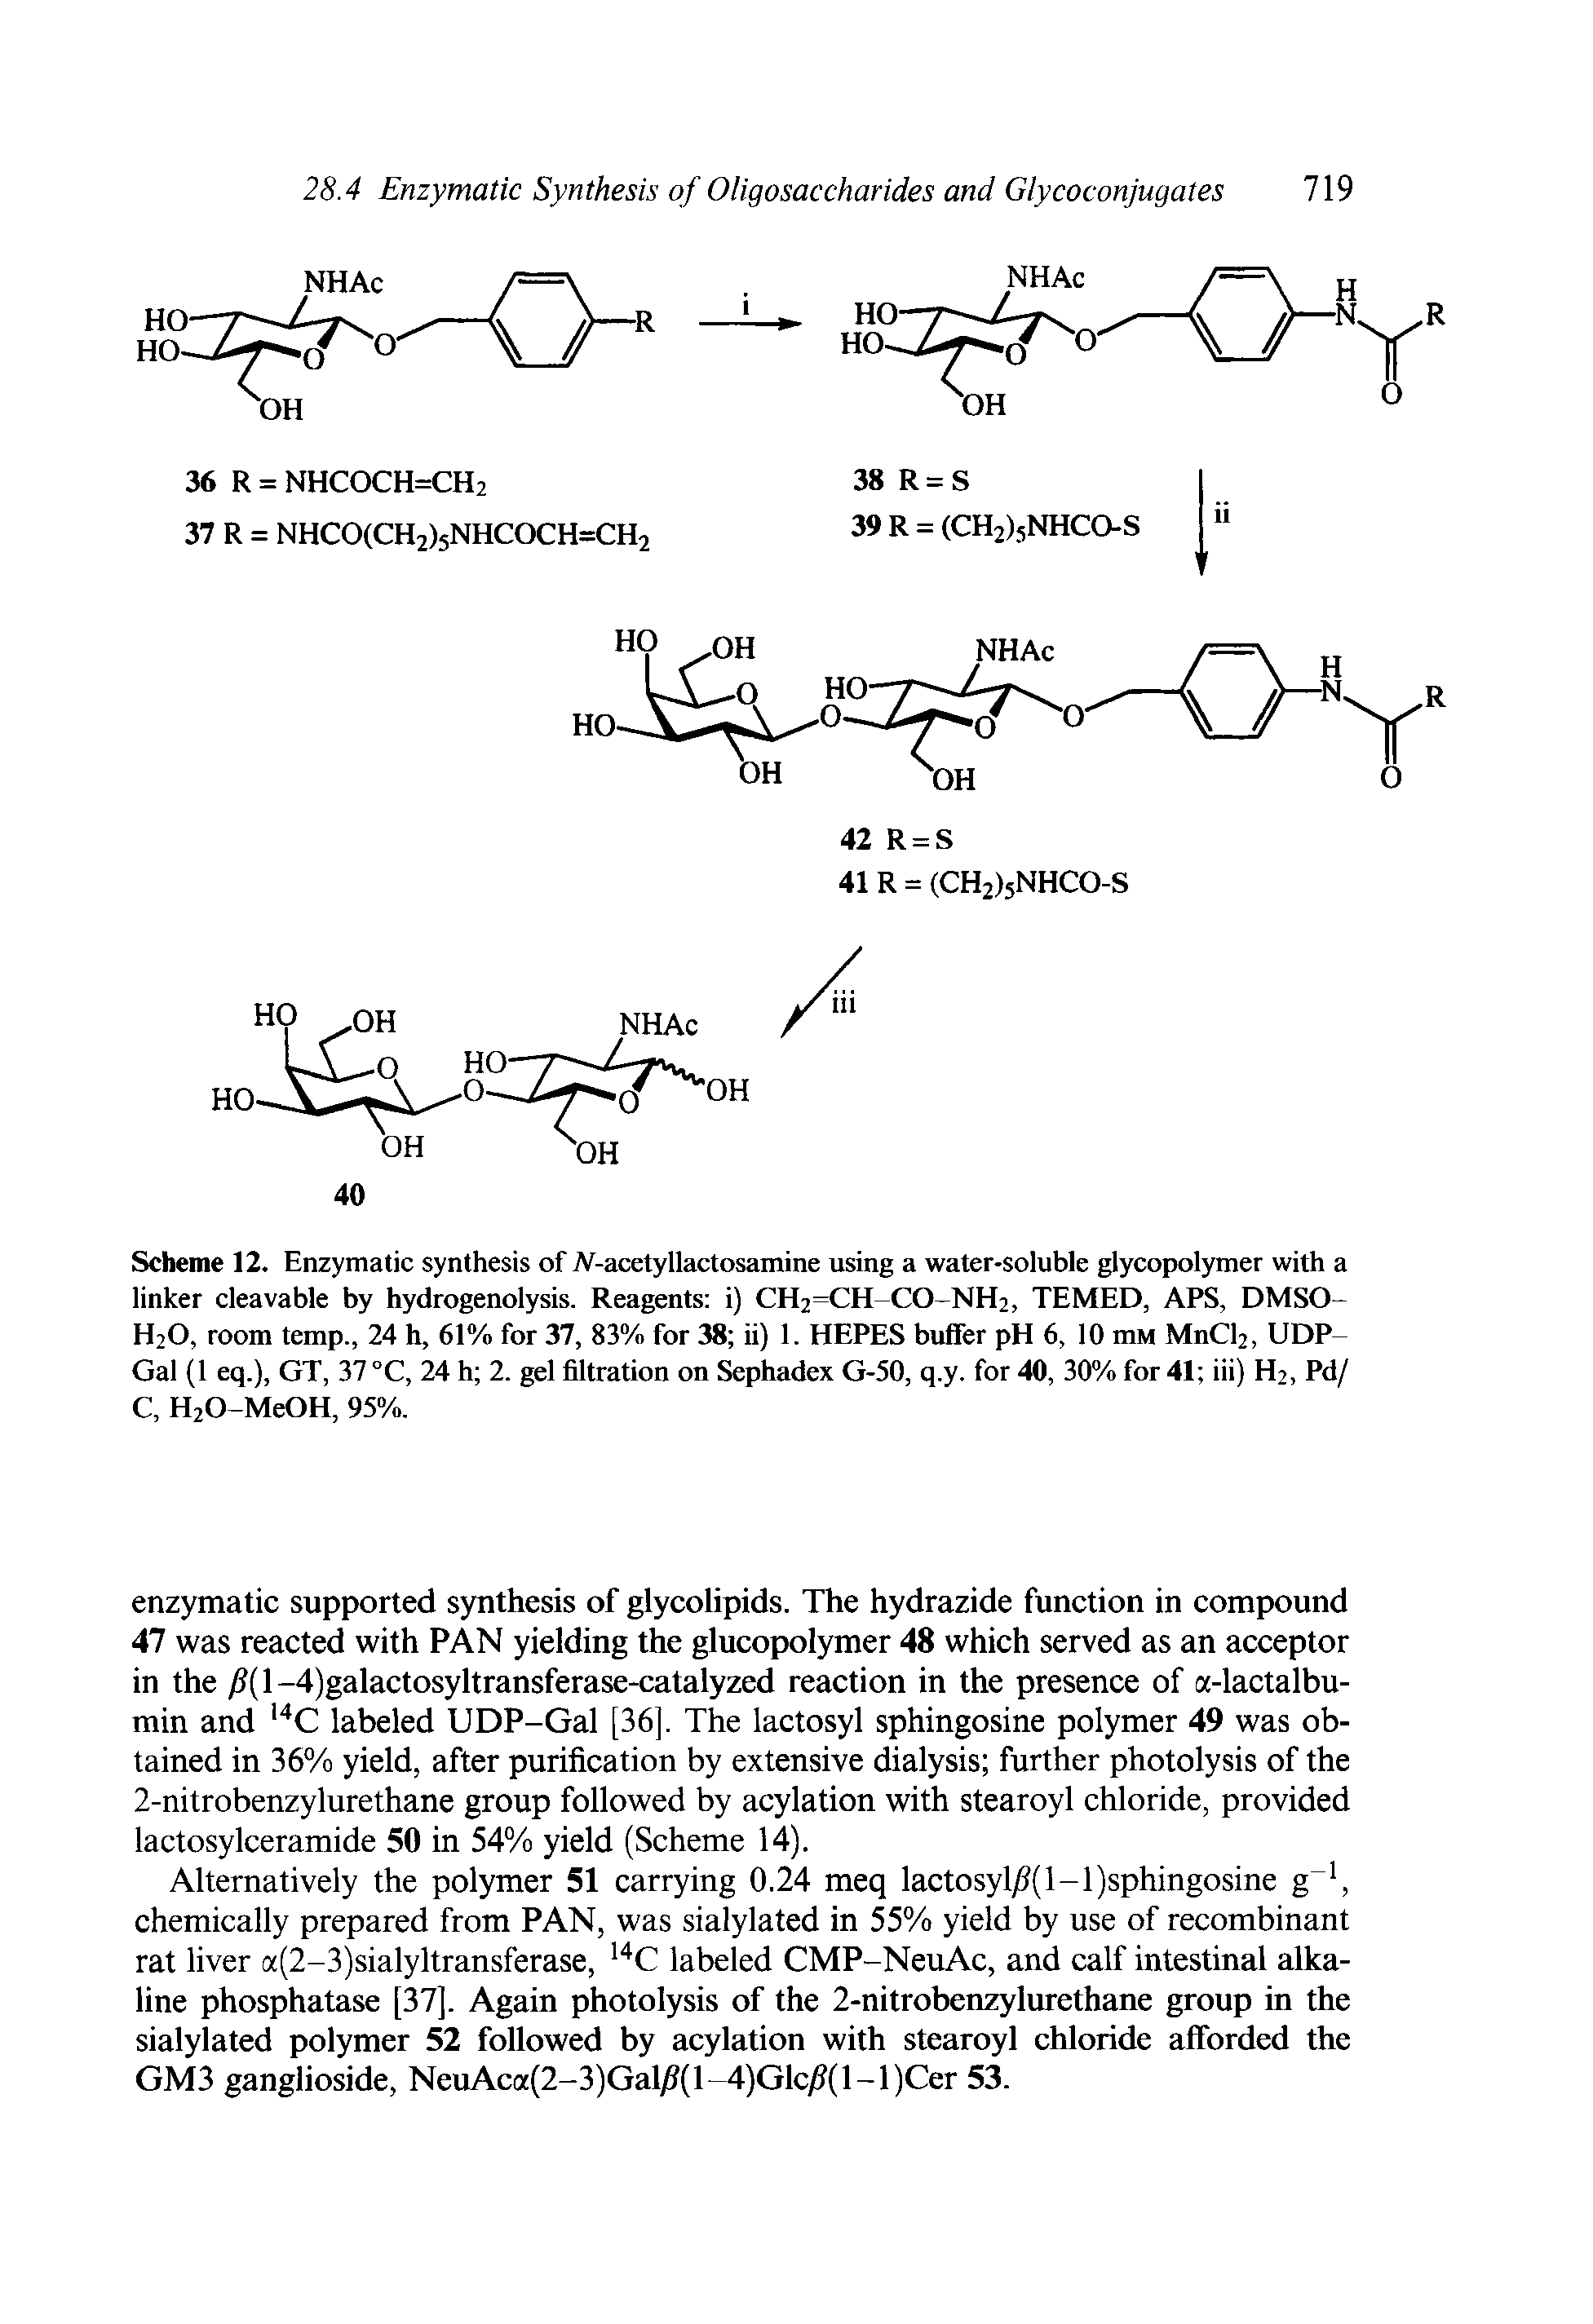 Scheme 12. Enzymatic synthesis of JV-acetyllactosamine using a water-soluble glycopolymer with a linker cleavable by hydrogenolysis. Reagents i) CH2=CH CO-NH2, TEMED, APS, DMSO-H2O, room temp., 24 h, 61% for 37, 83% for 38 ii) 1. HEPES buifer pH 6, 10 mM MnCl2, UDP-Gal (1 eq.), GT, 37 °C, 24 h 2. gel filtration on Sephadex G-50, q.y. for 40, 30% for 41 iii) H2, Pd/ C, H20-Me0H, 95%.